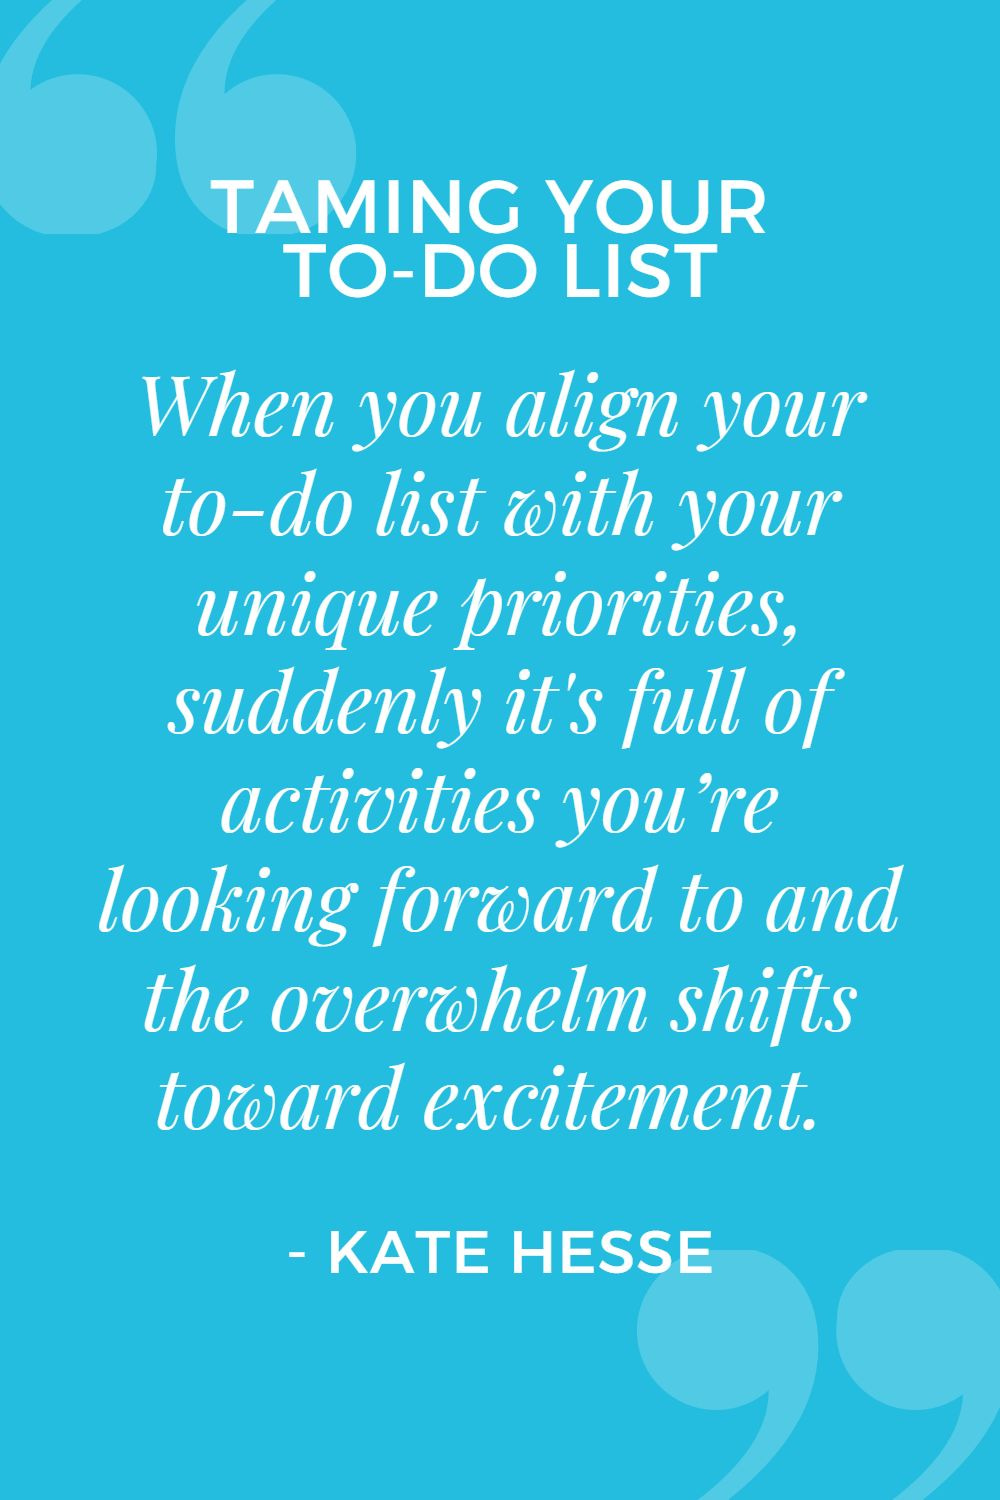 When you align your to-do list with your unique priorities, suddenly it's full of activities you're looking forward to and the overwhelm shifts toward excitement.